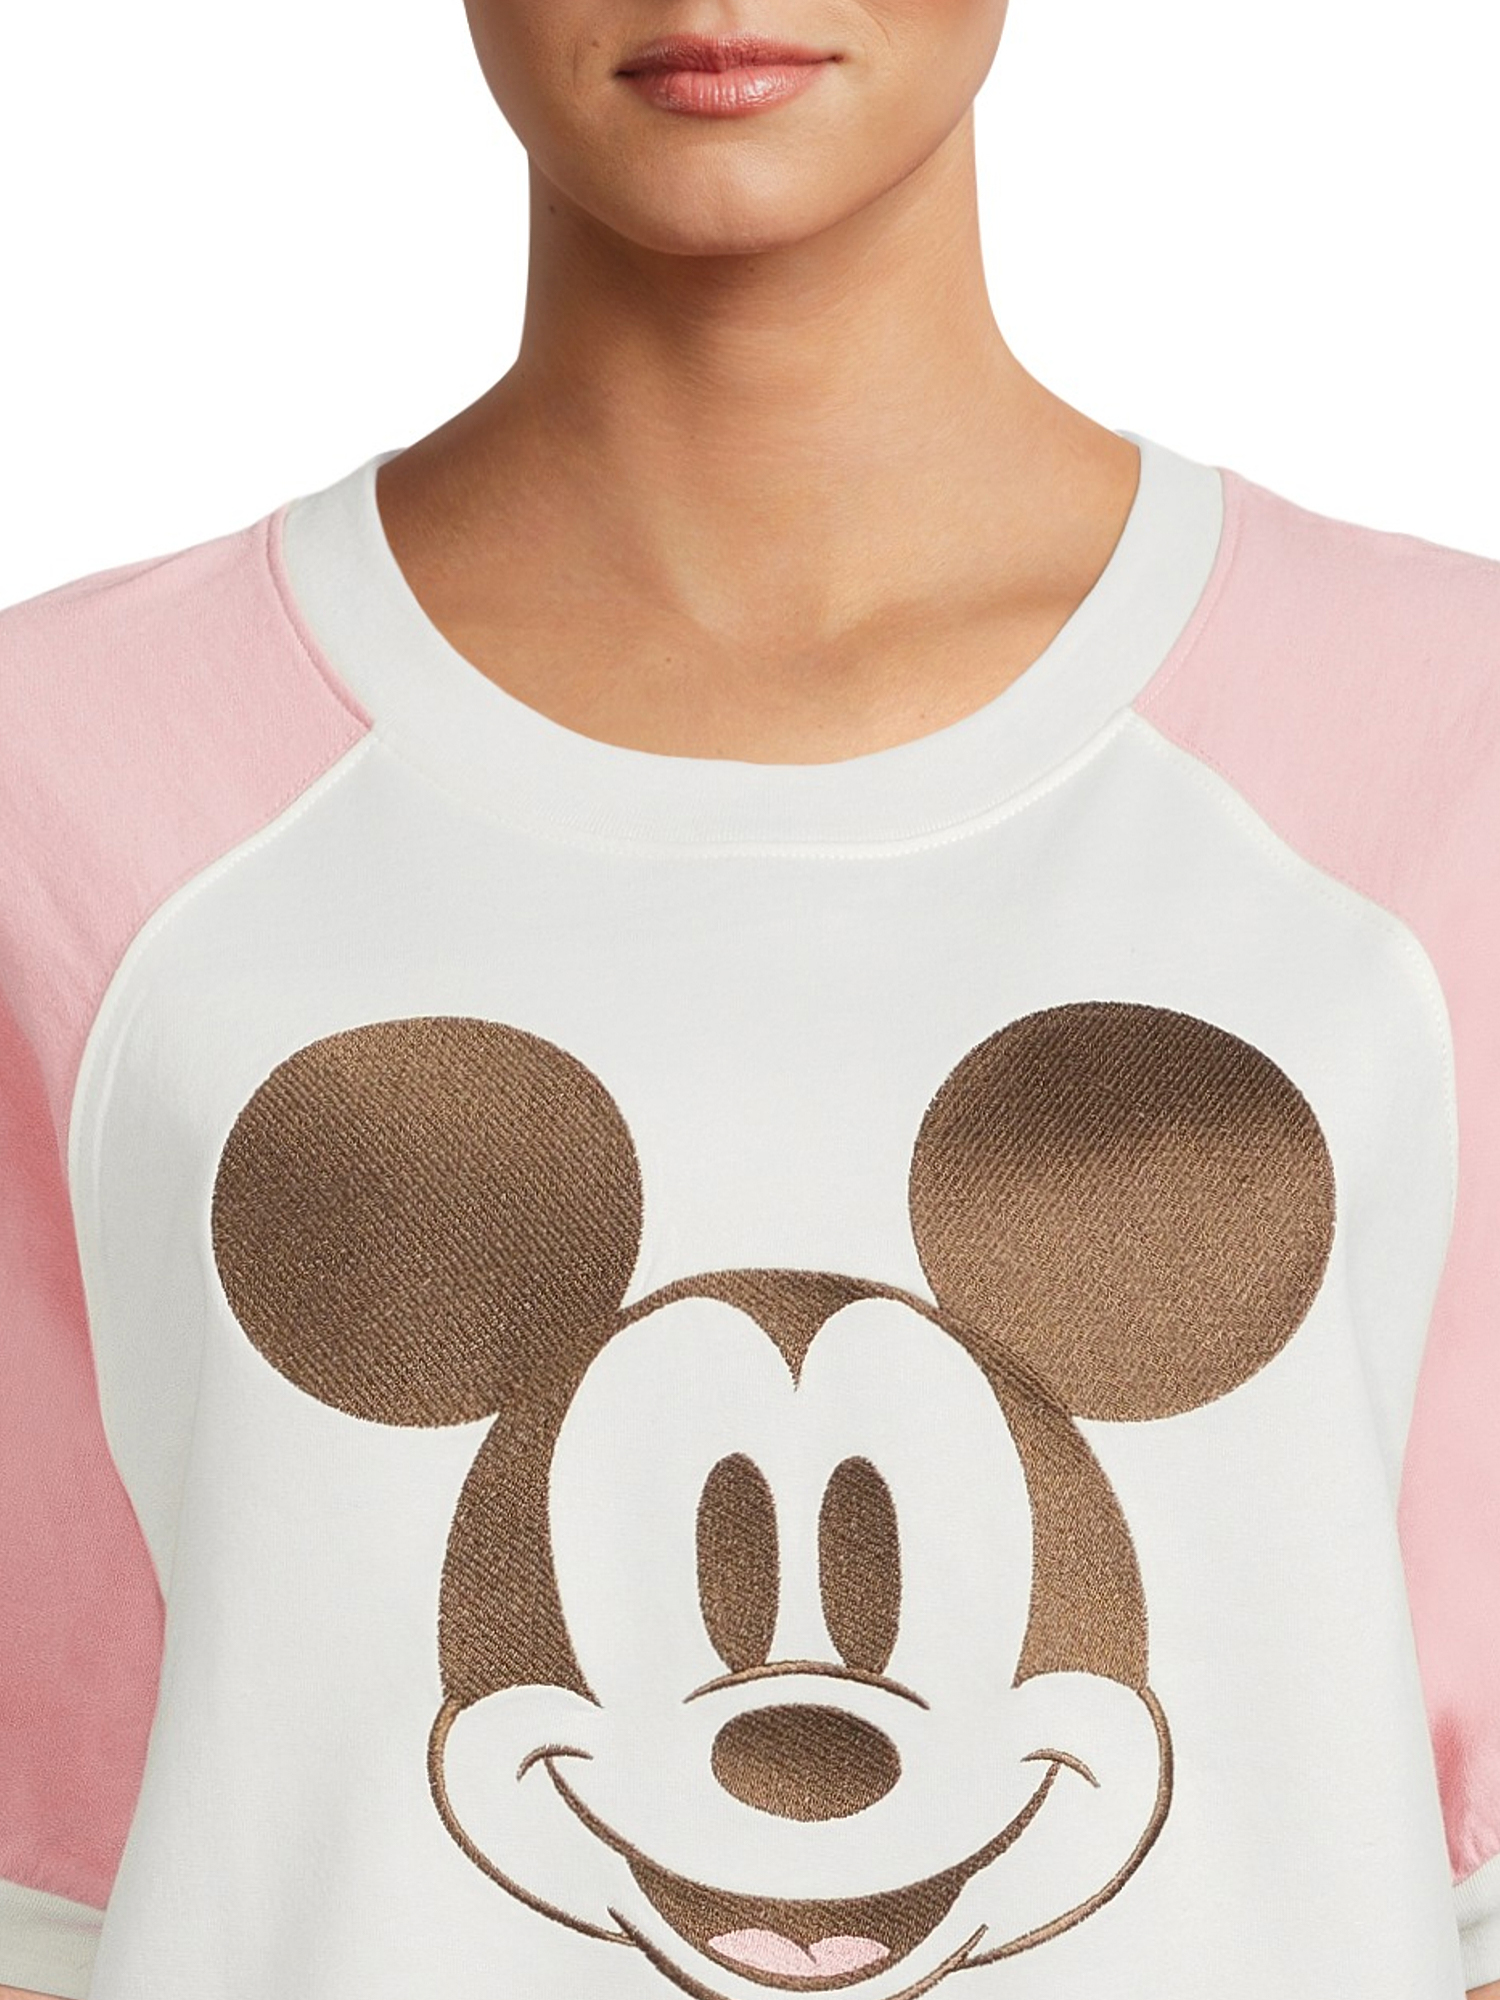 Disney Women's and Women's Plus Mickey Mouse Short Sleeve Top - image 5 of 5